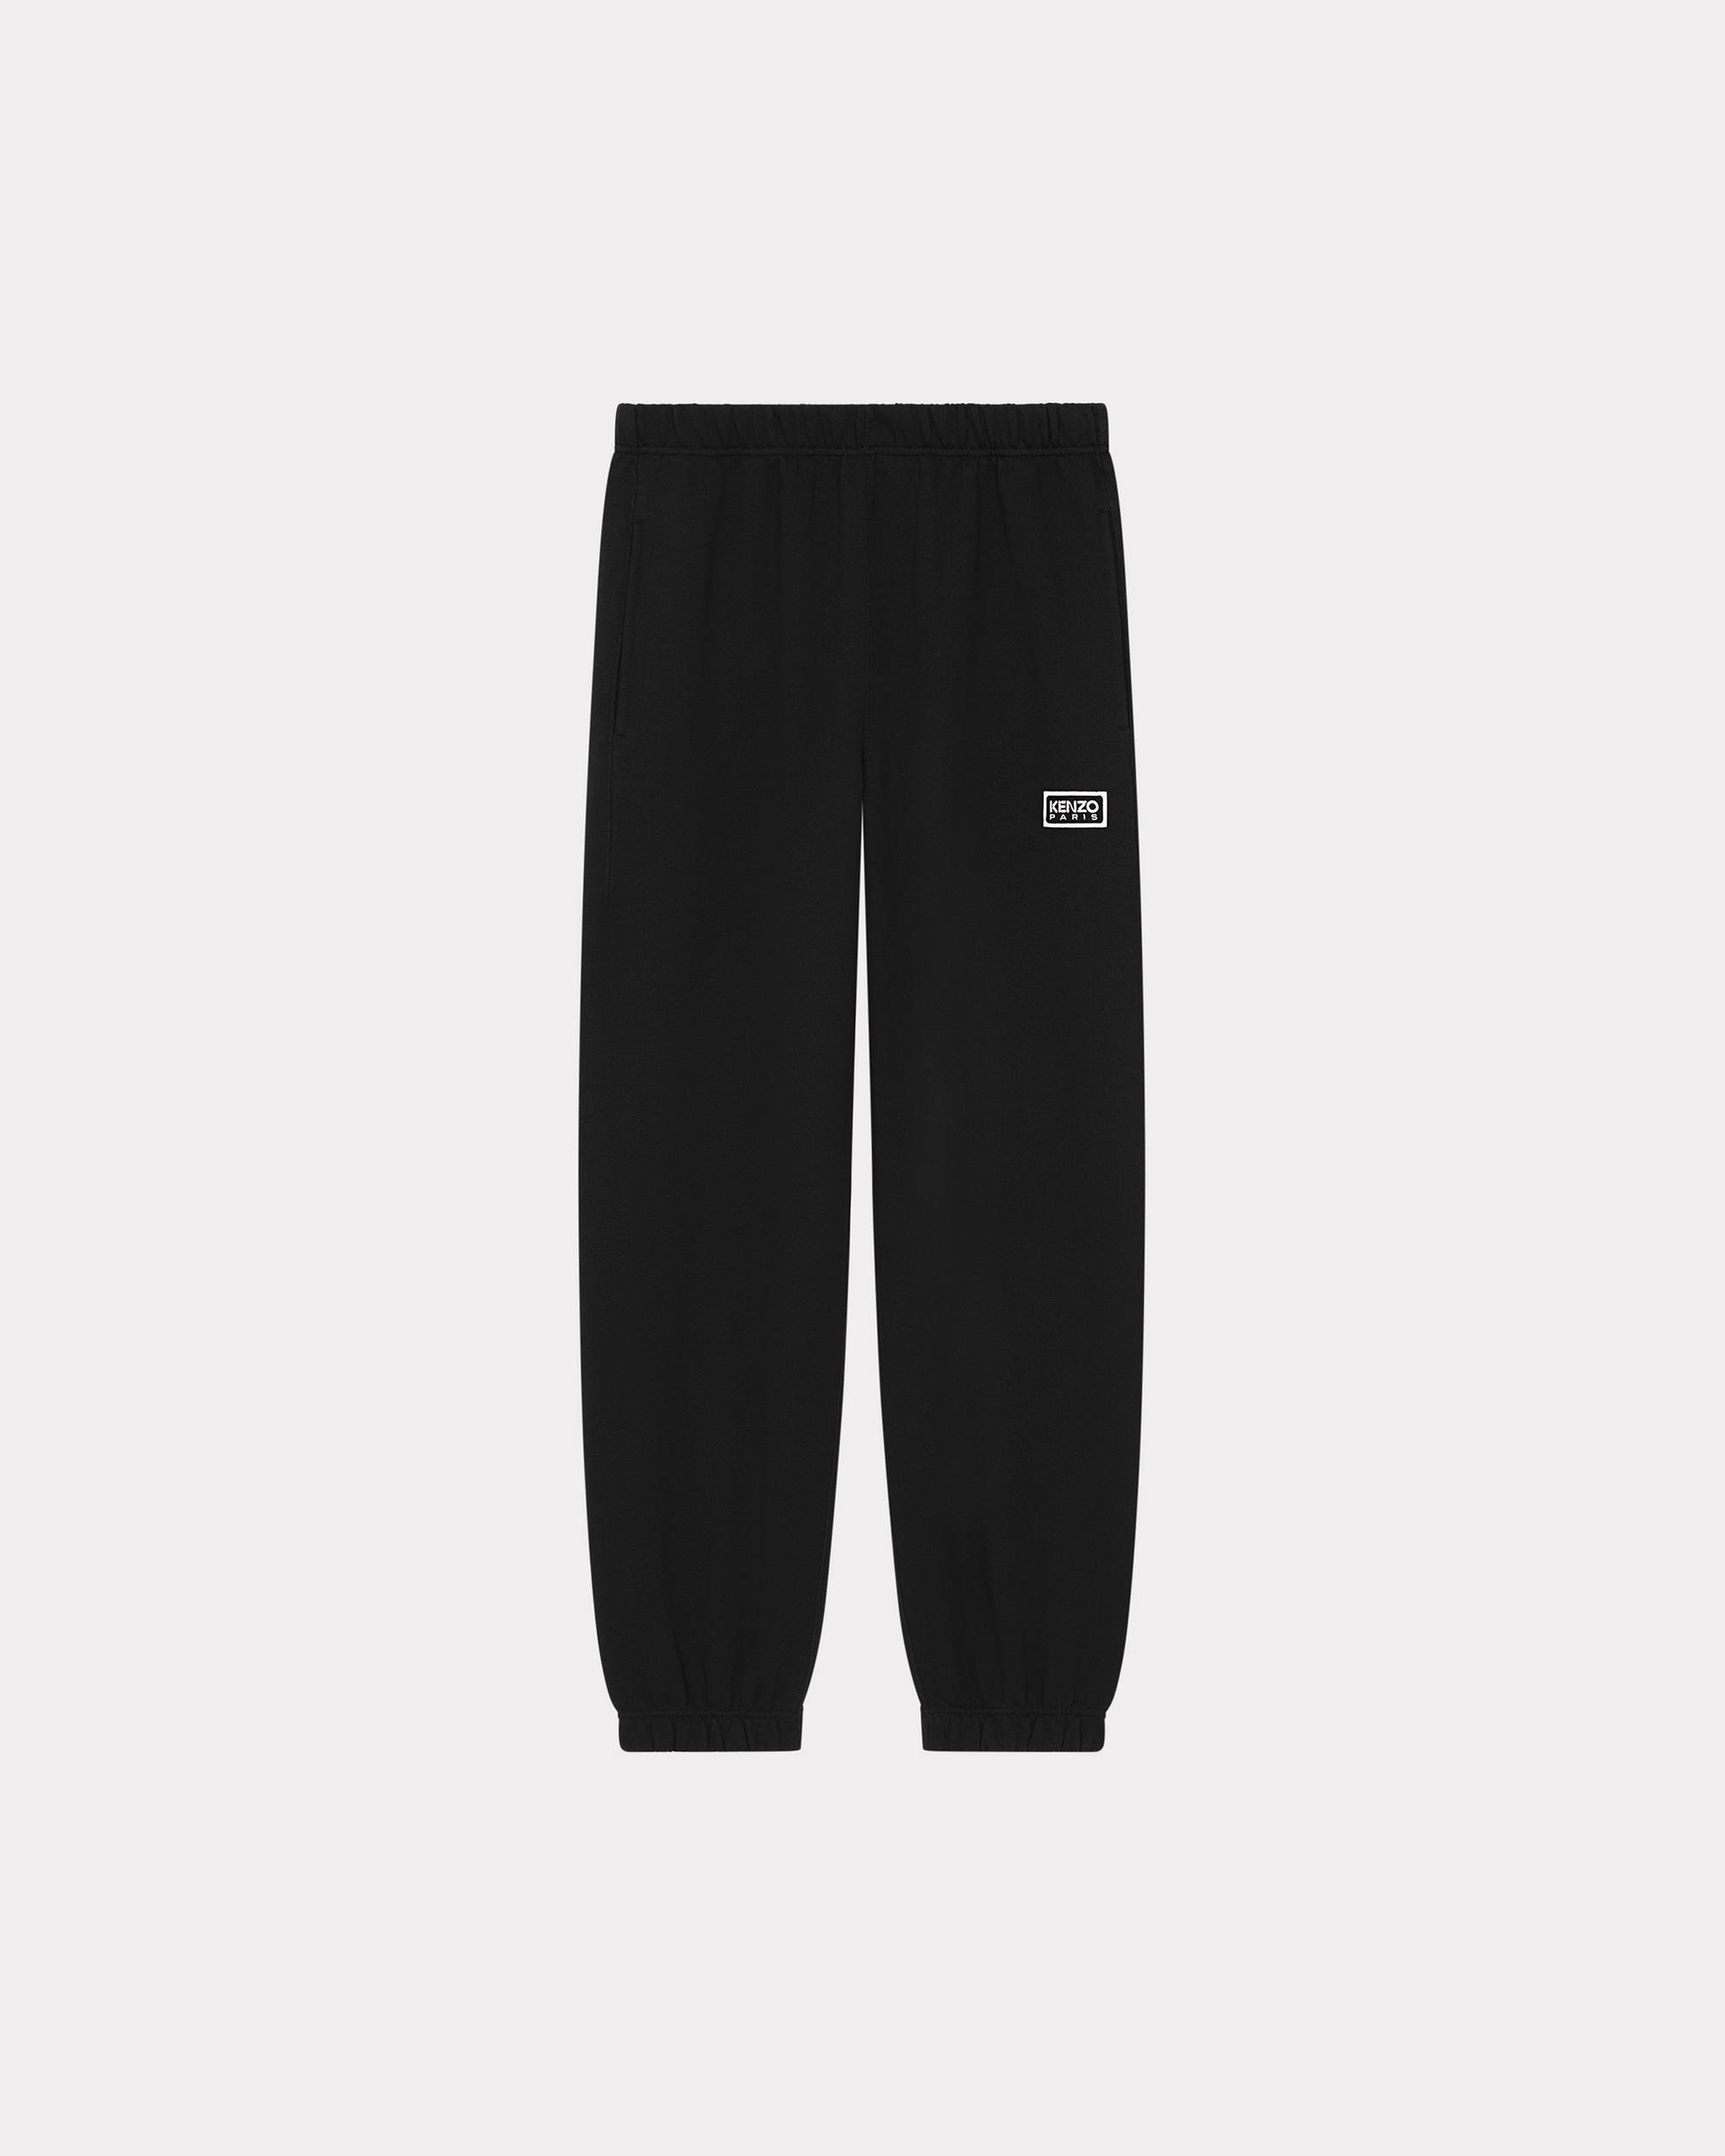 'KENZO Paris' embroidered classic two-tone jogging bottoms - 1